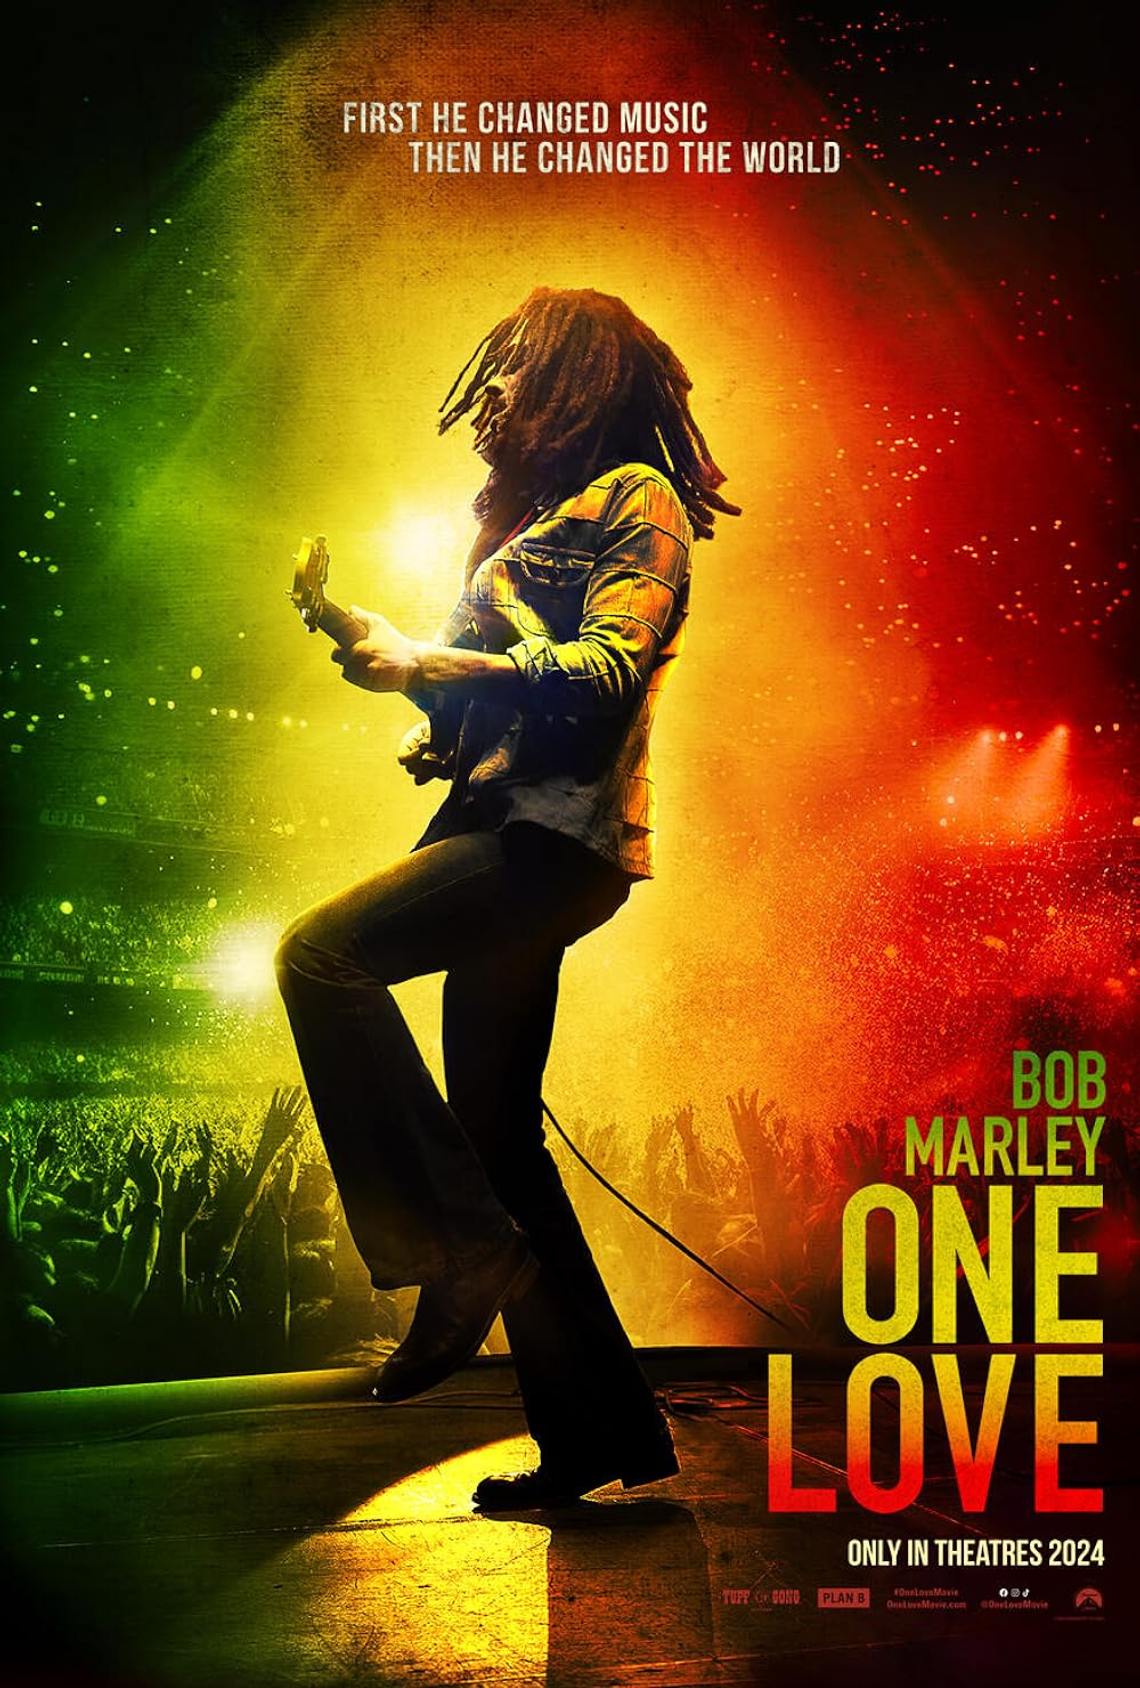 Movie Review: “Bob Marley: One Love”